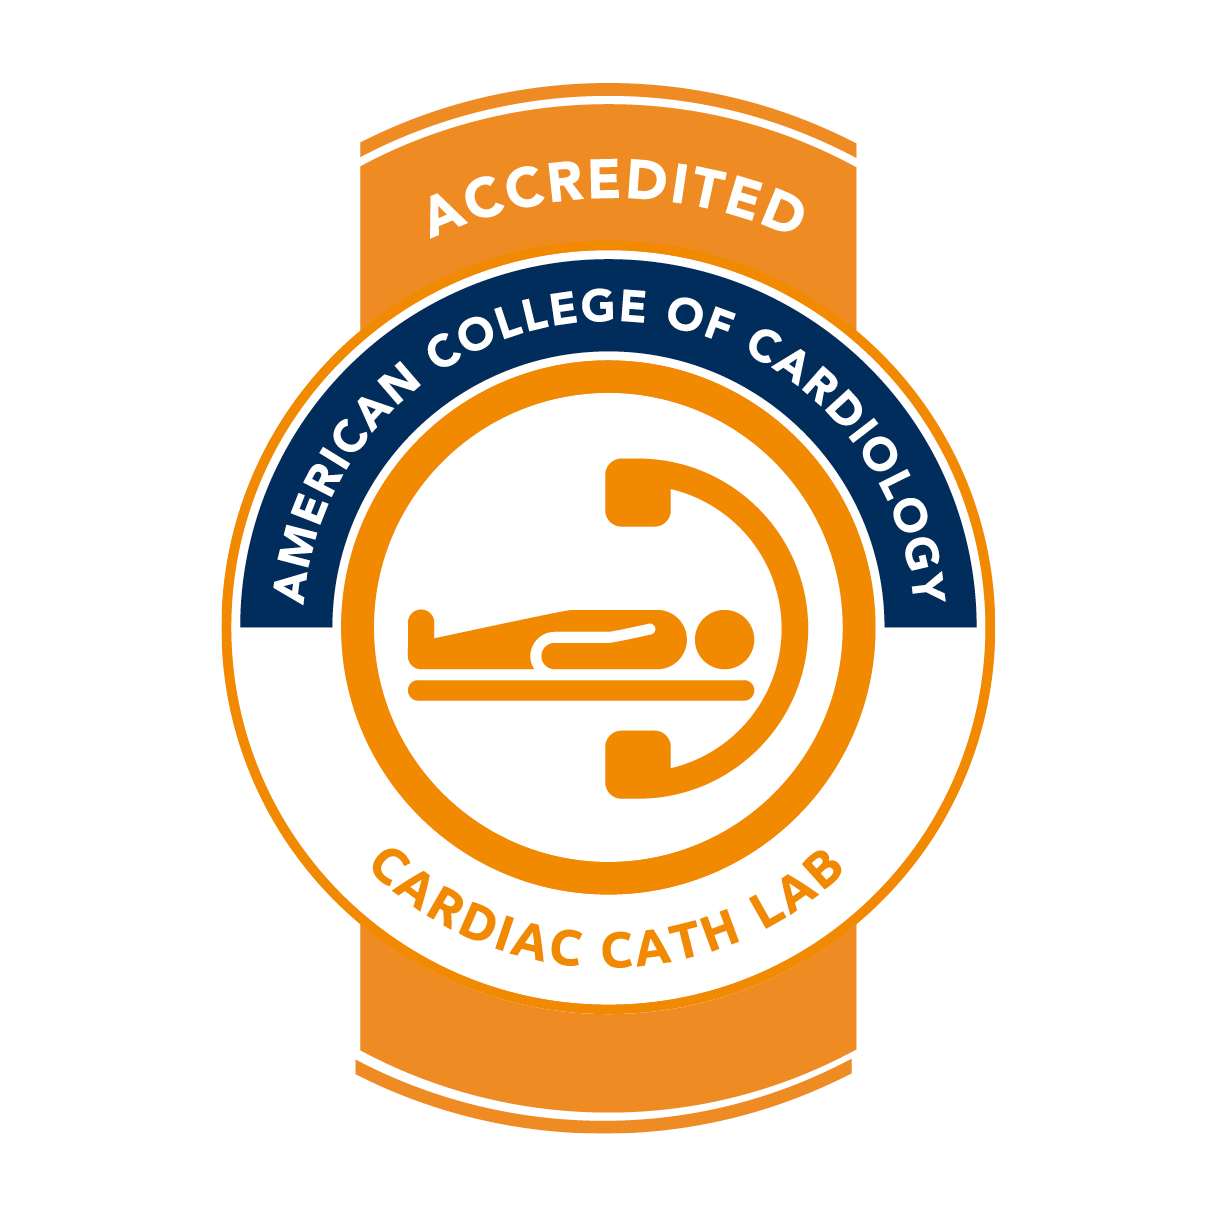 Seal showing that Louis and Peaches is accredited for Cardiac Cath Lab by the American College of Cardiology